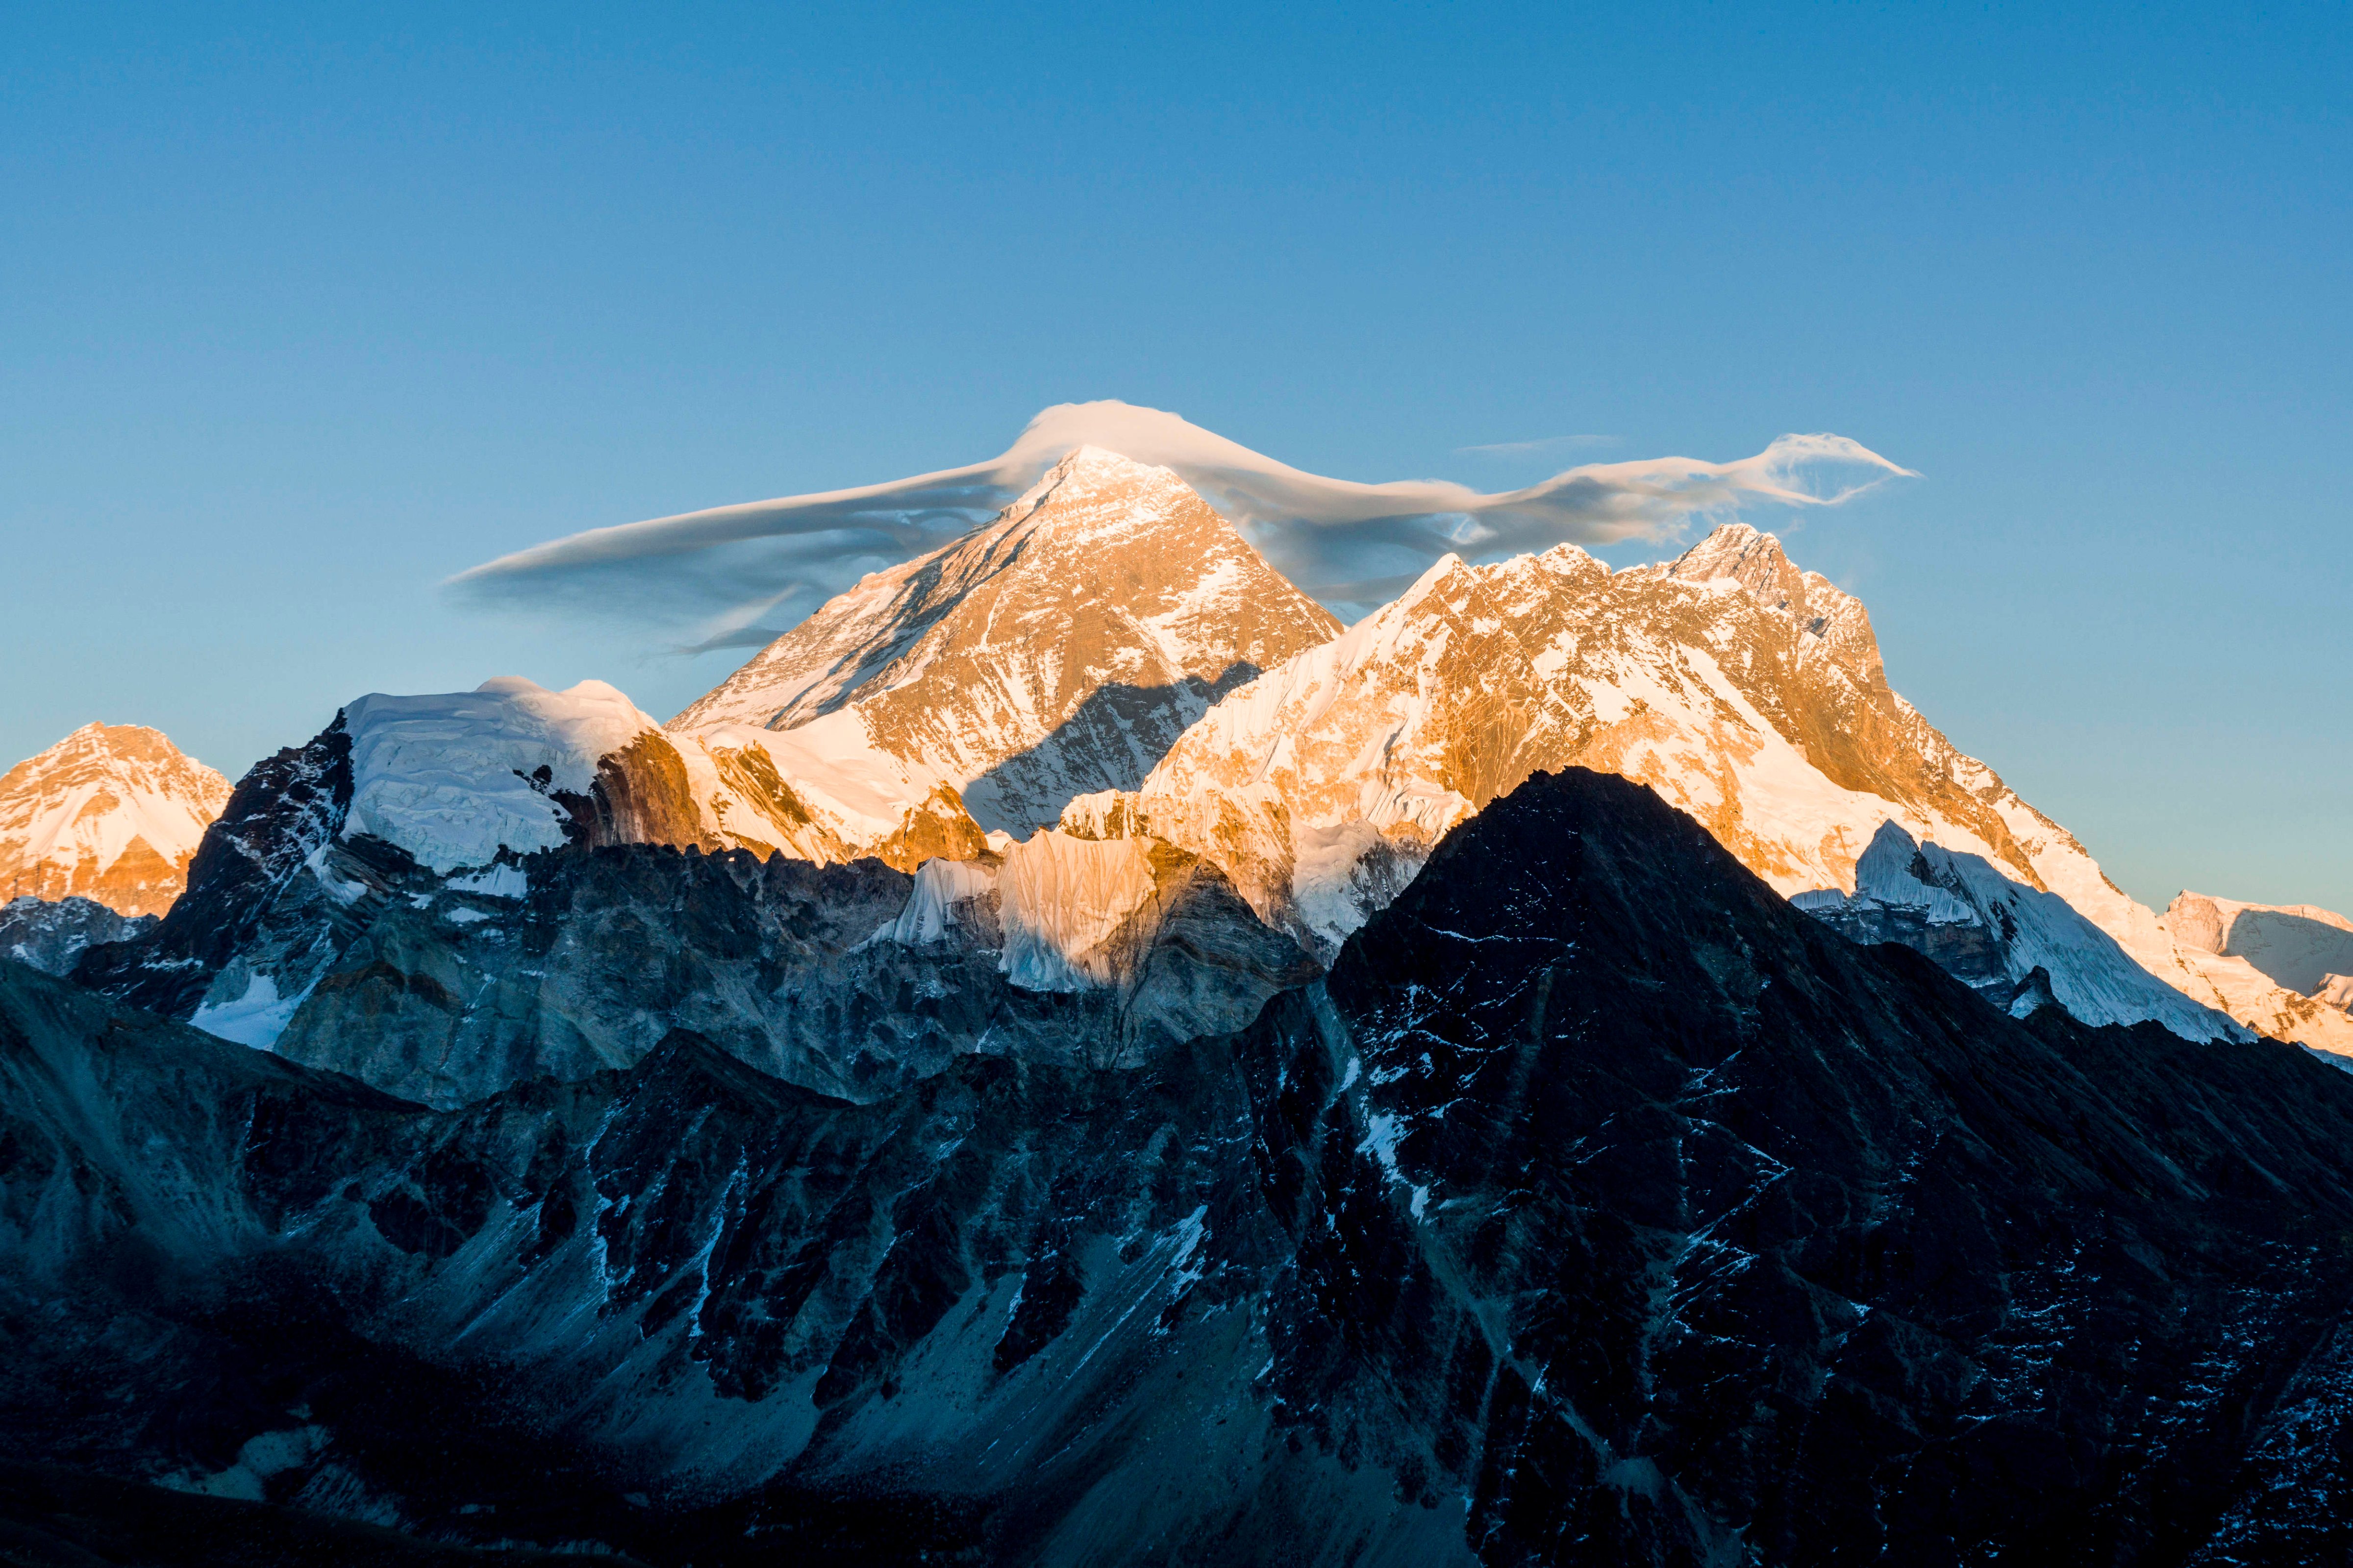 The mountain Mt. Everest (8848m) with a white cloud on top, seen from Gokyo Ri (5360m) at sunset. (Frank Bienewald—LightRocket/Getty Images)